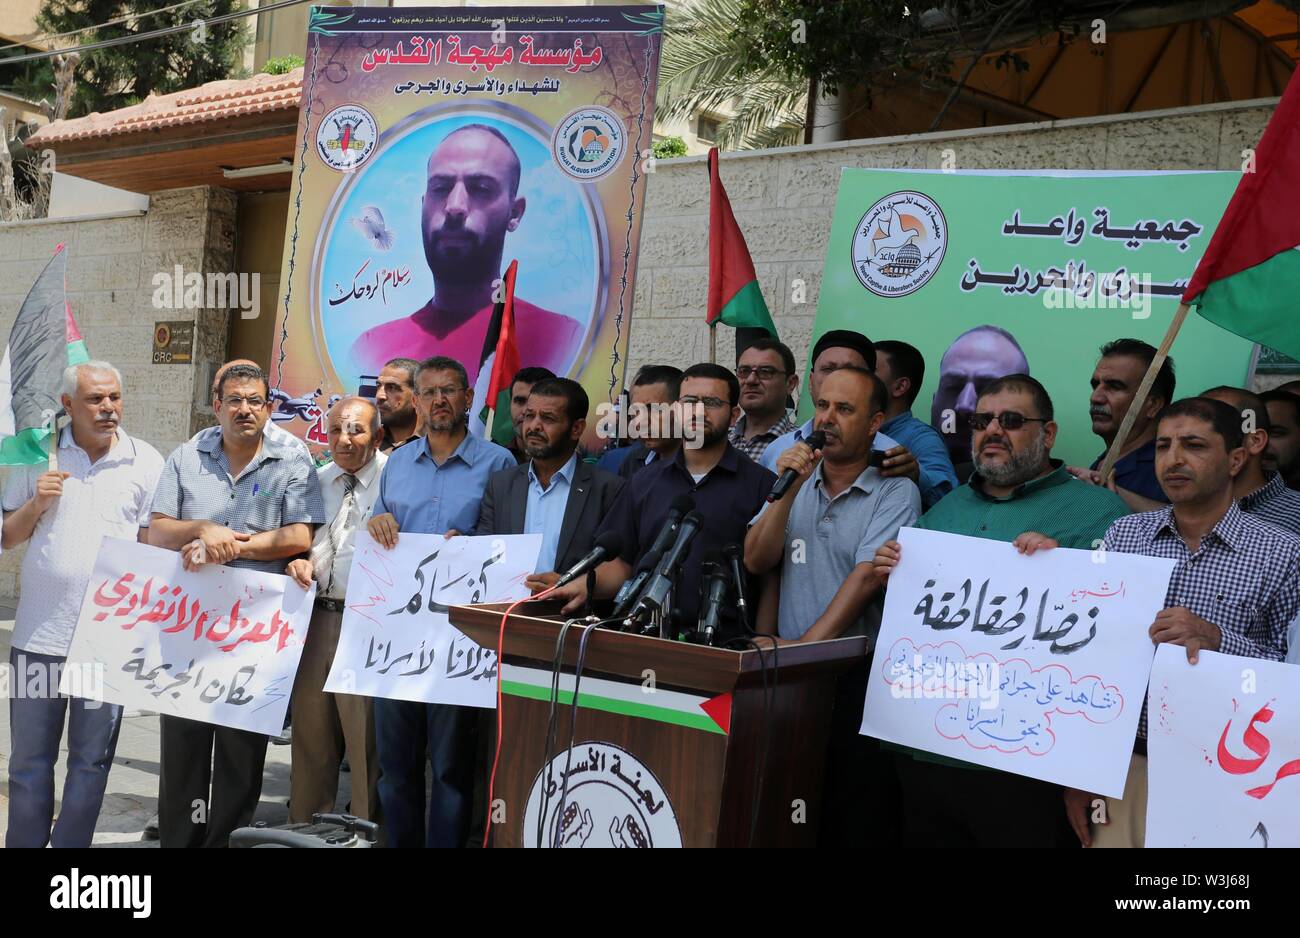 Gaza City, Gaza Strip, Palestinian Territory. 16th July, 2019. Palestinians take part in a protest in solidarity with prisoners in Israeli jails, in front of the Red cross, in Gaza city, on July 16, 2019. Head of the prisoners and ex-prisoner affairs committee, Maj. Gen. Qadri Abu Bakr, announced on Tuesday the death of Nassar Taqatqa while in solitary confinement in the Israeli prison of Nitzan in Al-Ramle Credit: Ashraf Amra/APA Images/ZUMA Wire/Alamy Live News Stock Photo